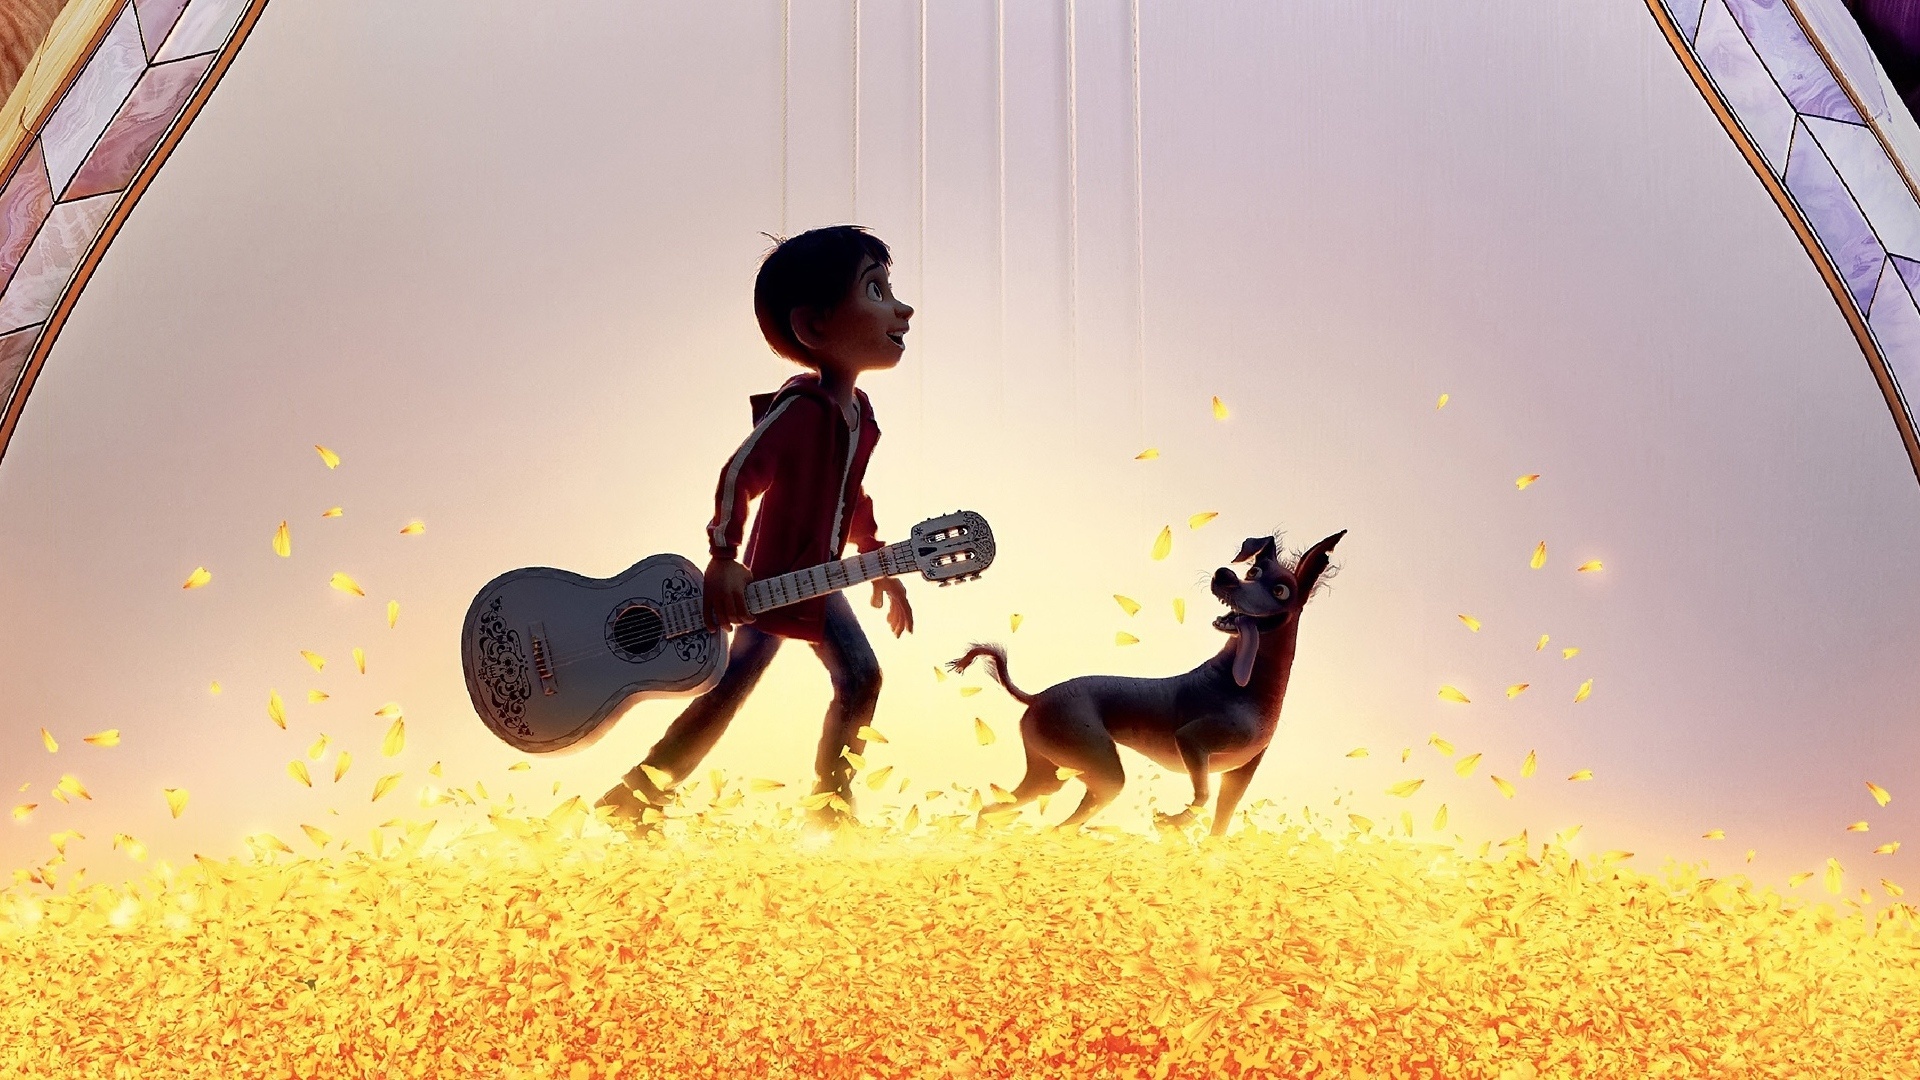 Coco animation characters and guitar one of the best animated movies HD  wallpaper download